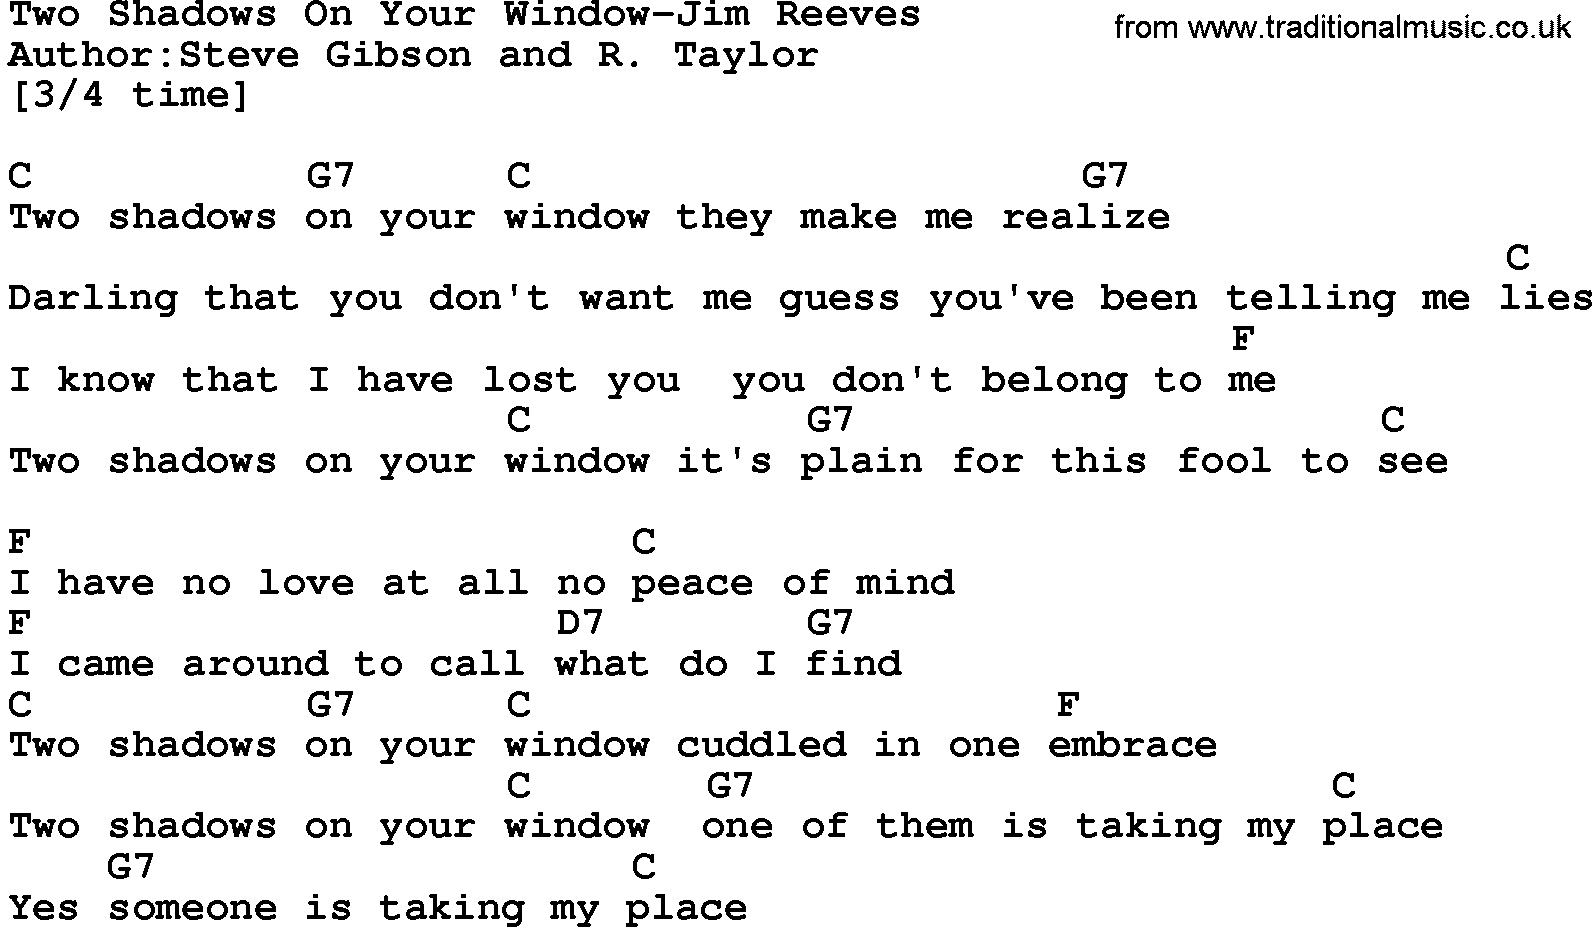 Country music song: Two Shadows On Your Window-Jim Reeves lyrics and chords